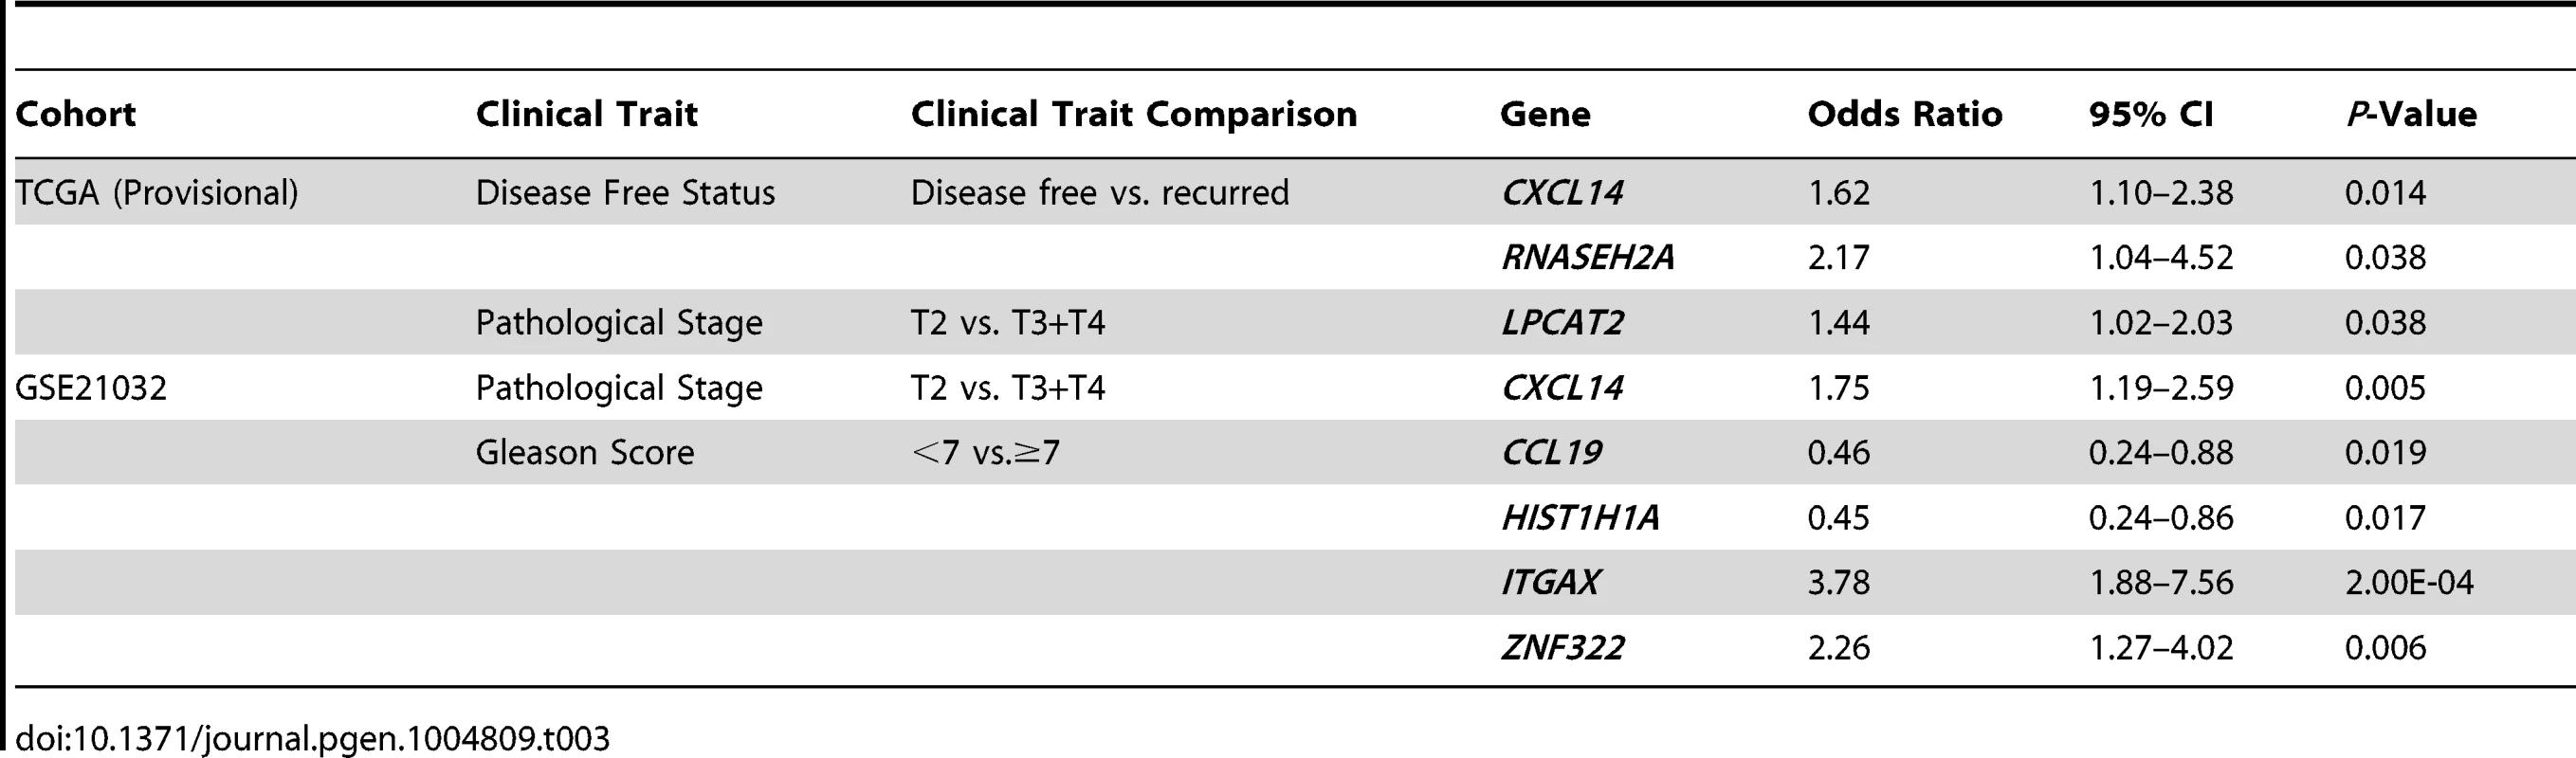 Stepwise logistic regression analysis of QTL candidate genes in TCGA (Provisional) and GSE21032 cohorts.